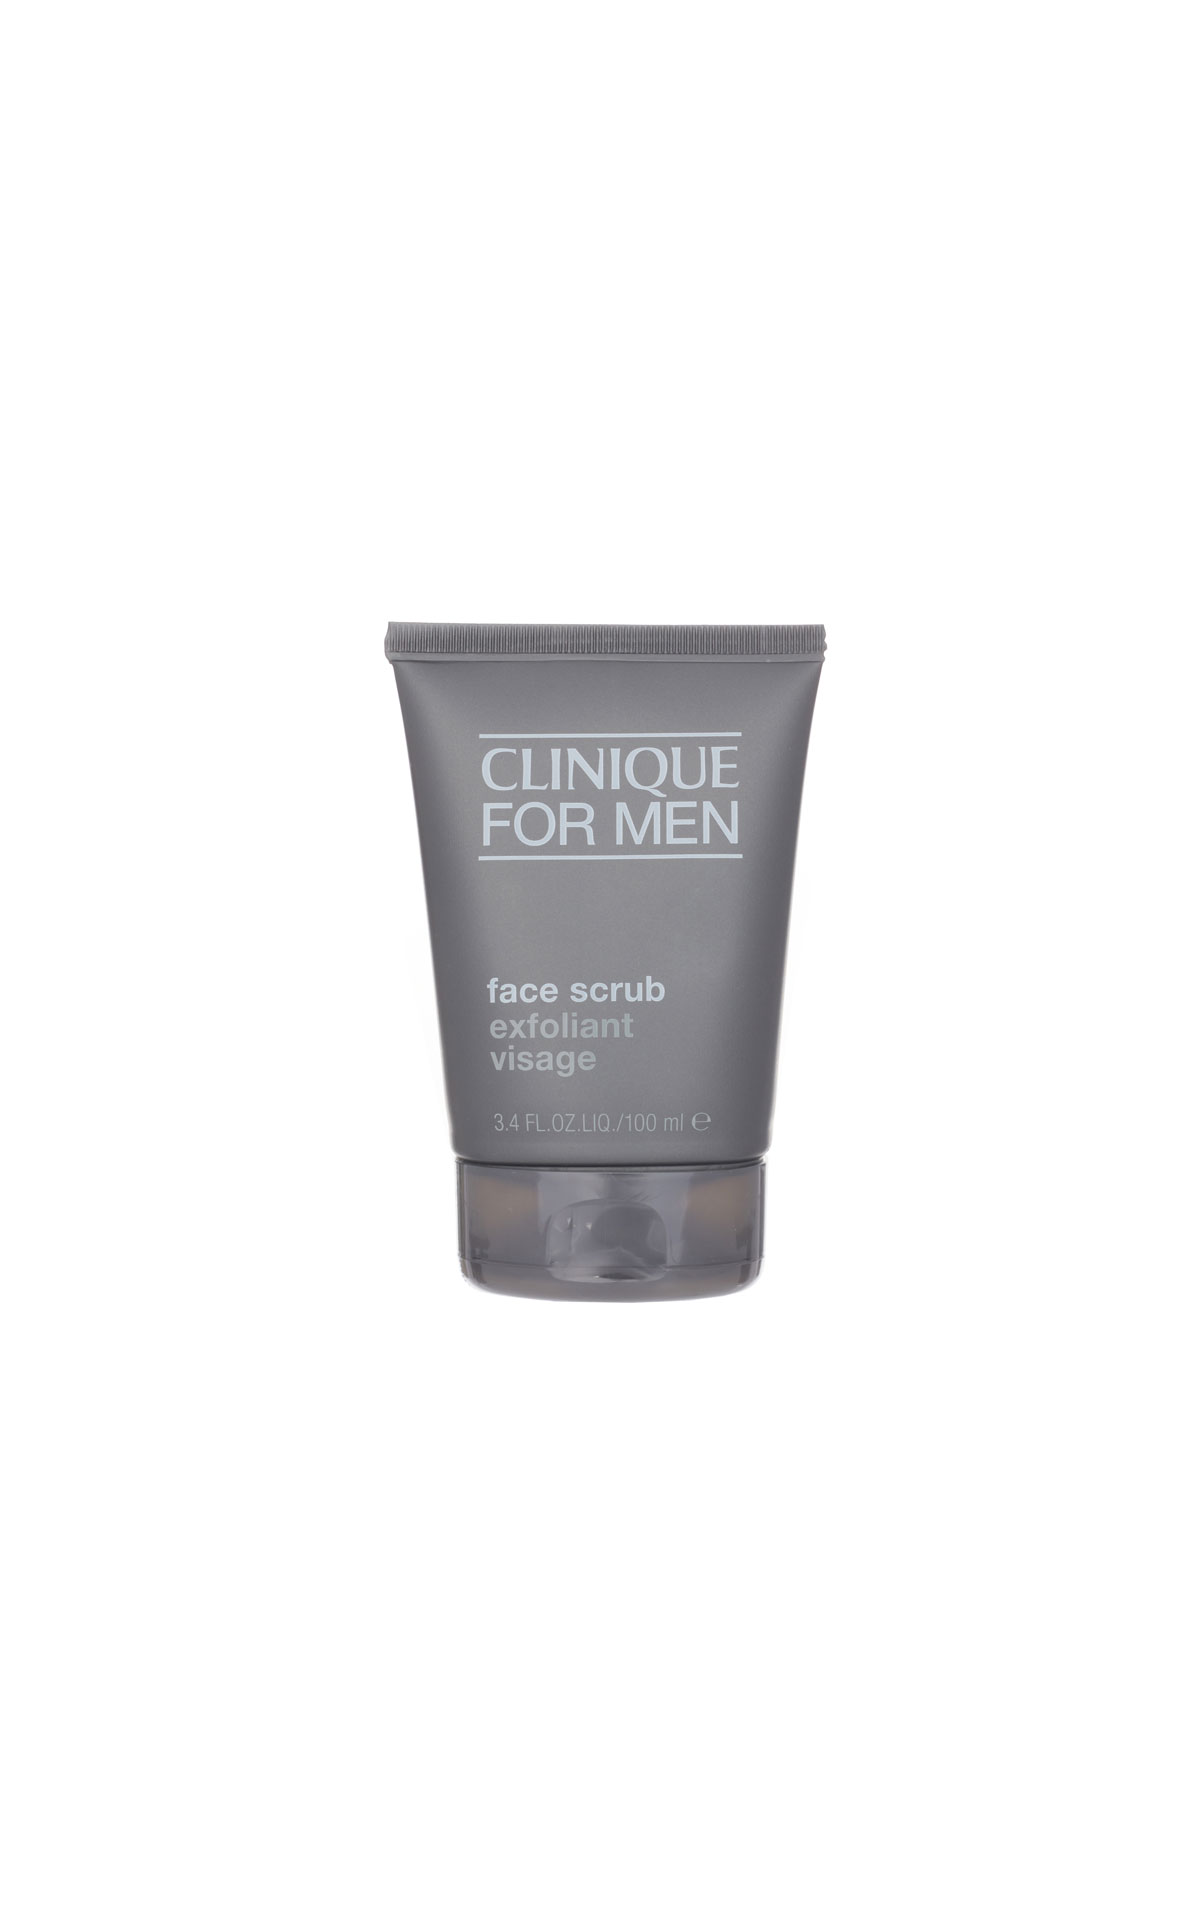 The Cosmetics Company Store Clinique For Men Face Scrub from Bicester Village